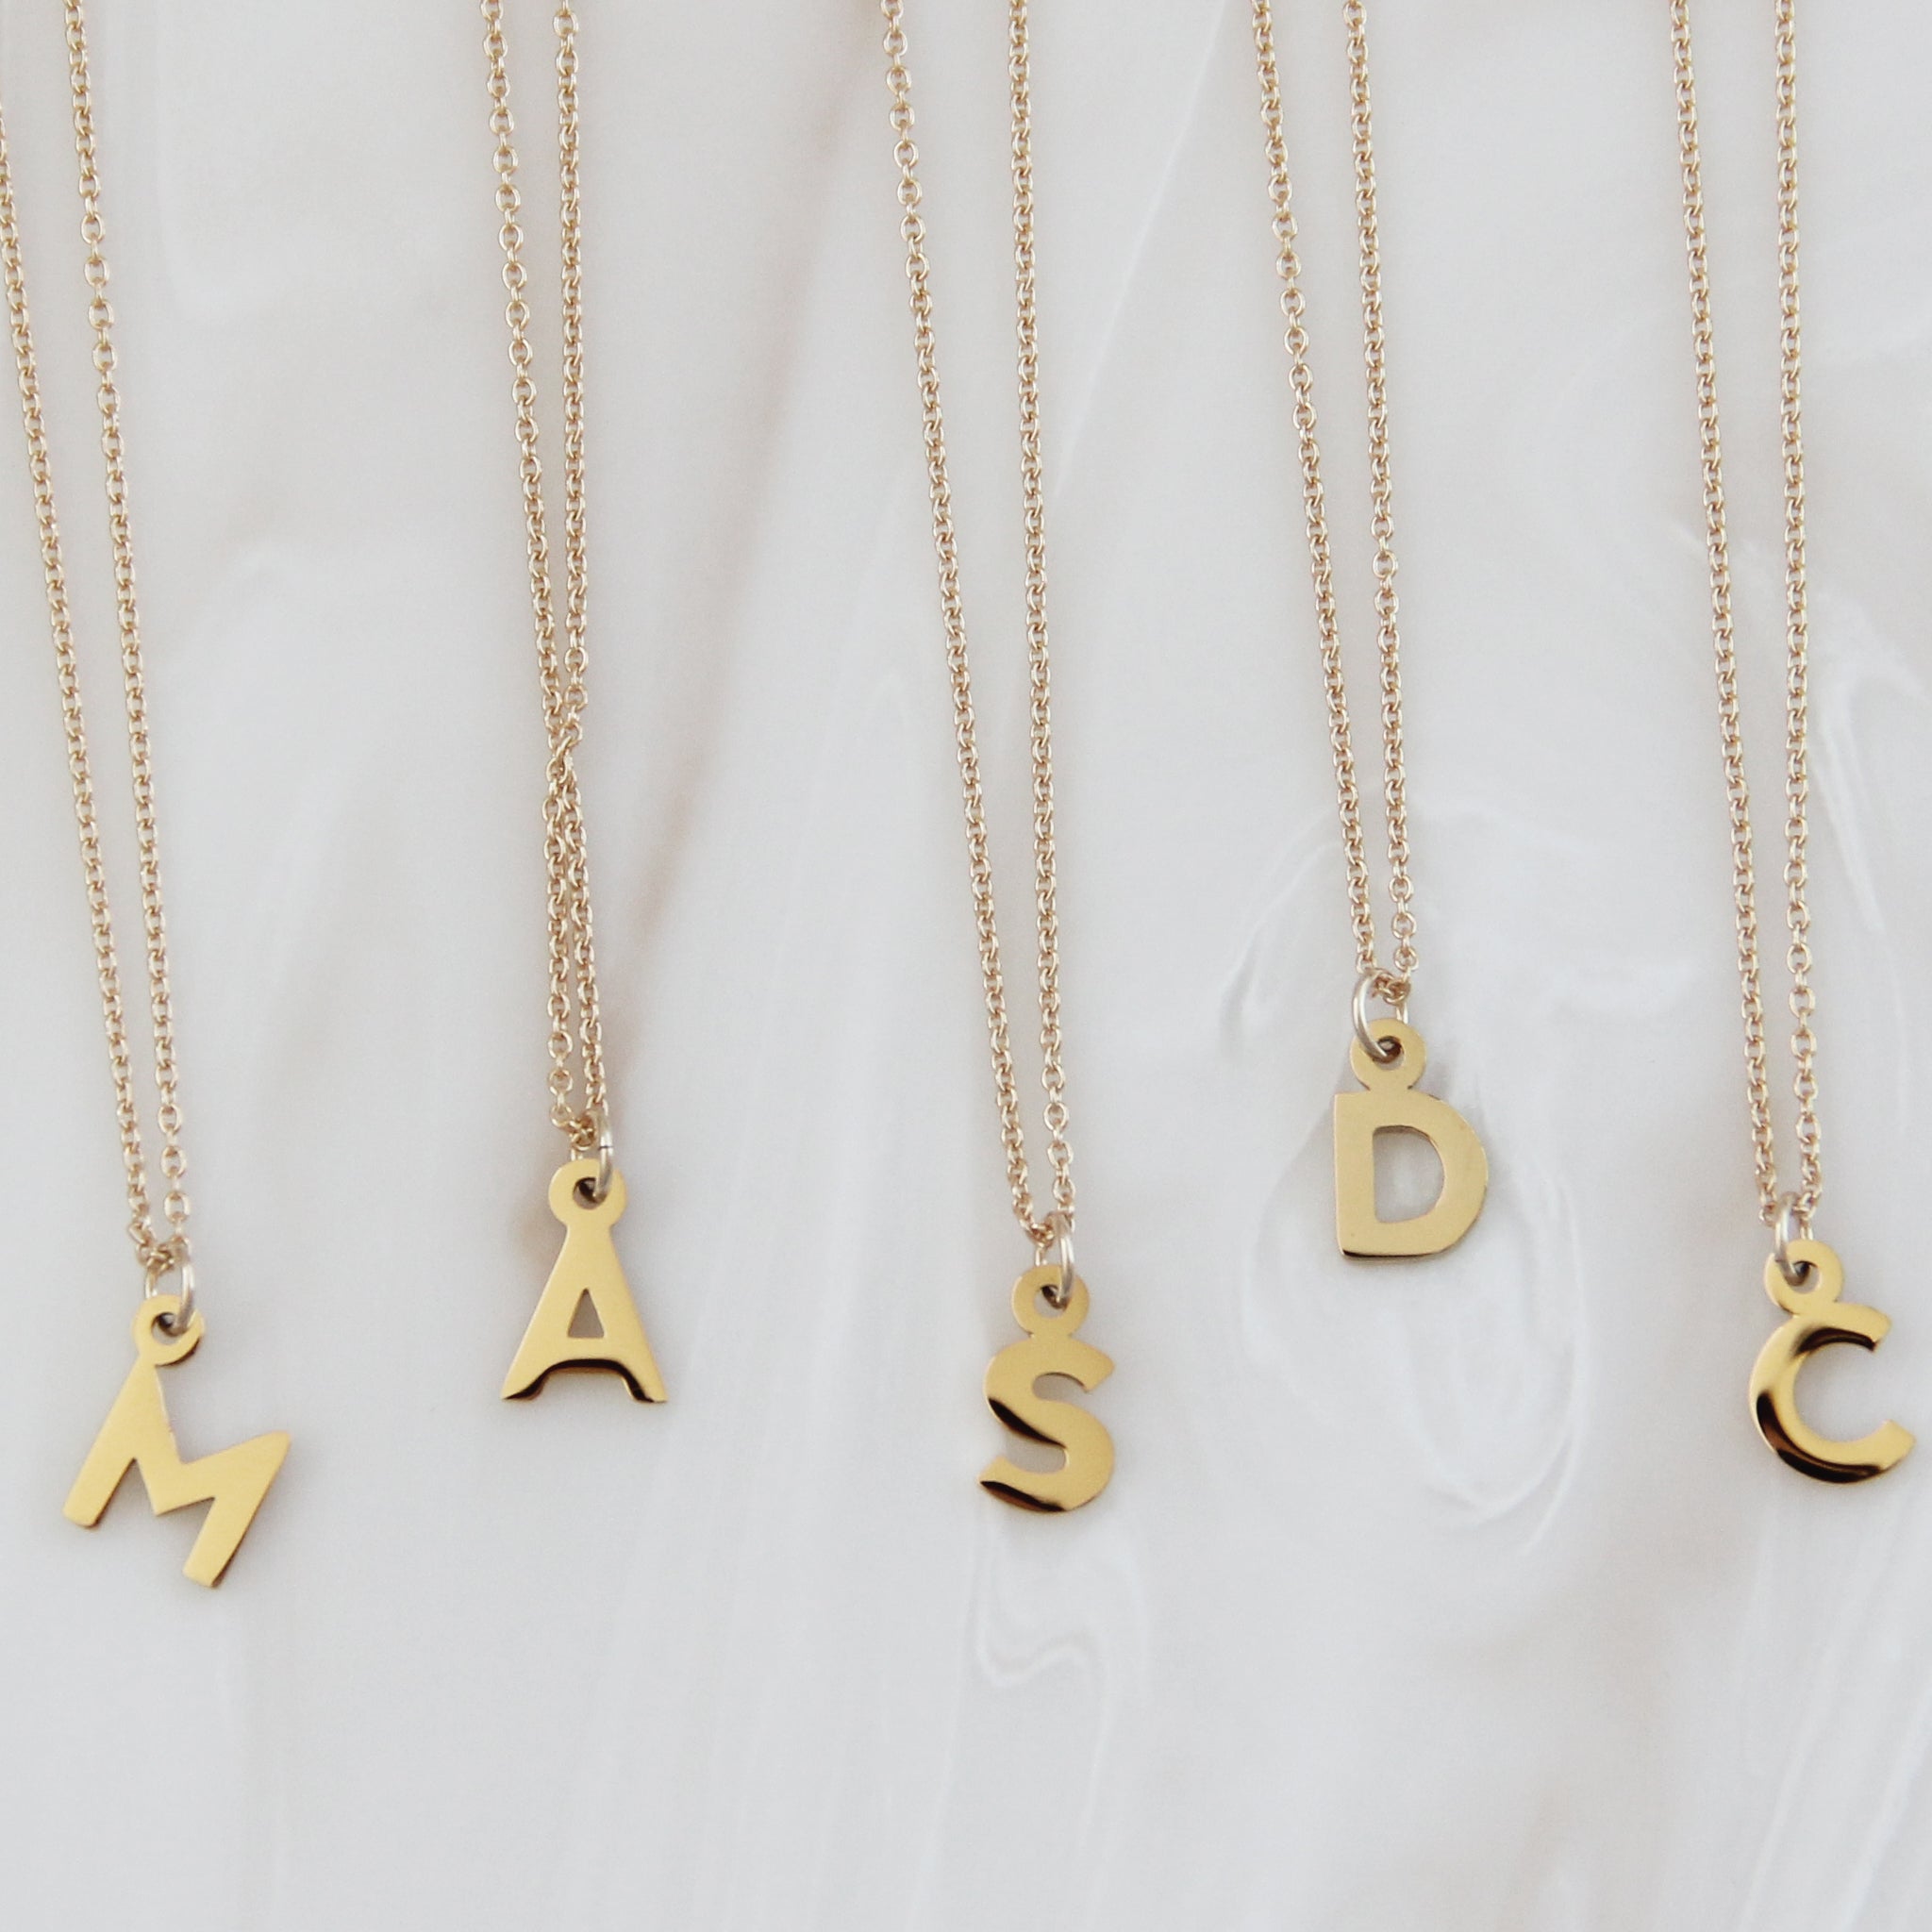 INITIAL/NUMBER NECKLACE